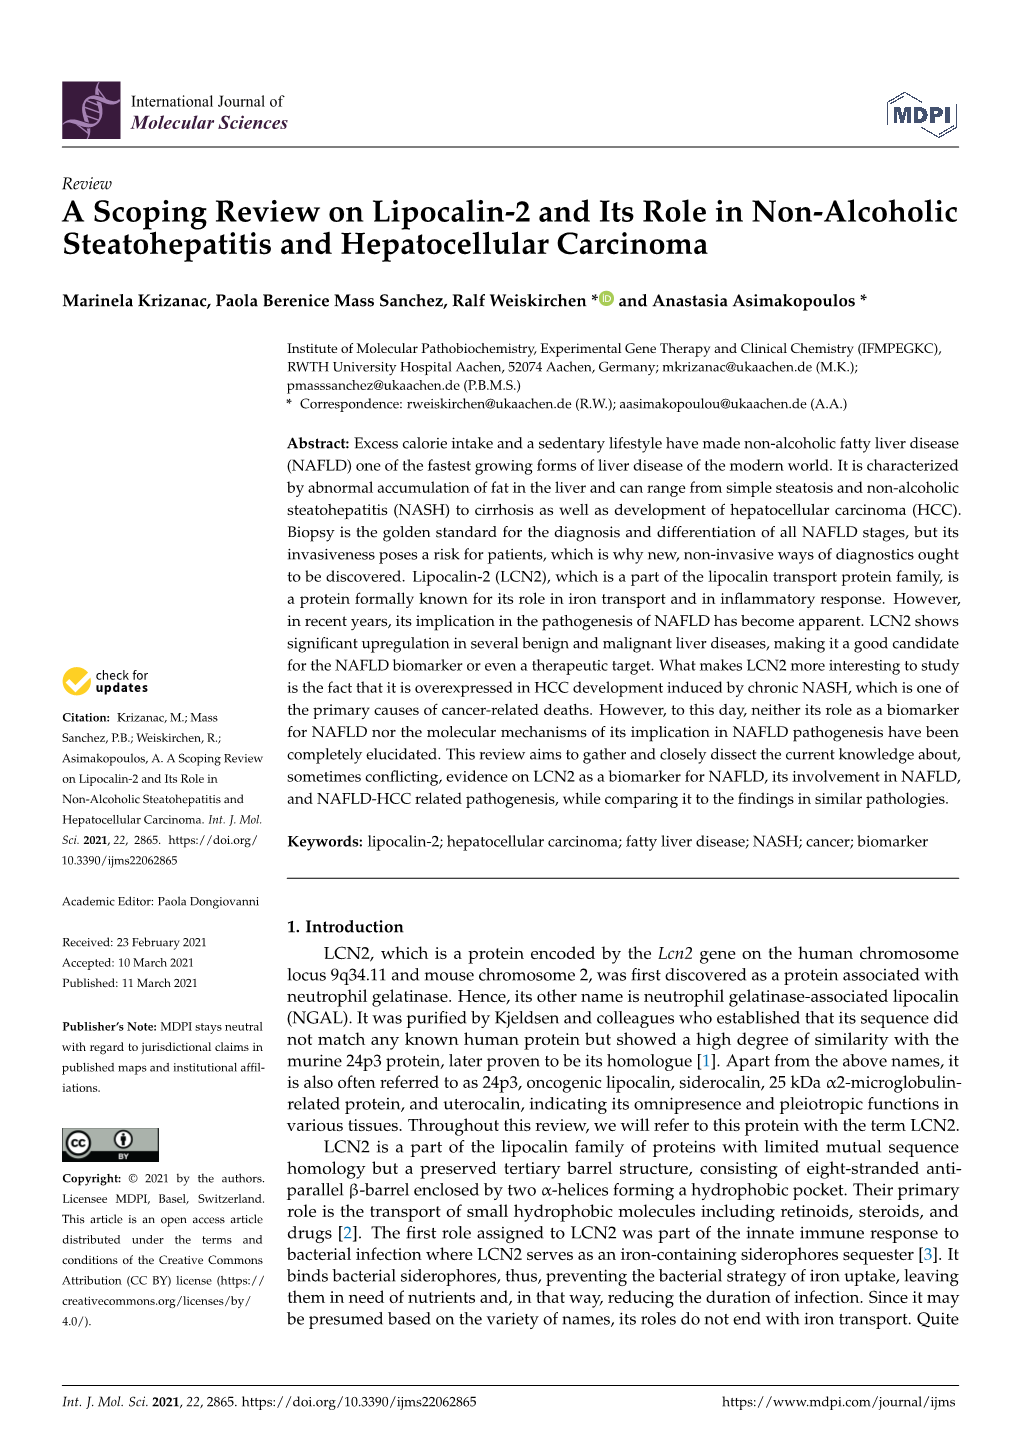 A Scoping Review on Lipocalin-2 and Its Role in Non-Alcoholic Steatohepatitis and Hepatocellular Carcinoma